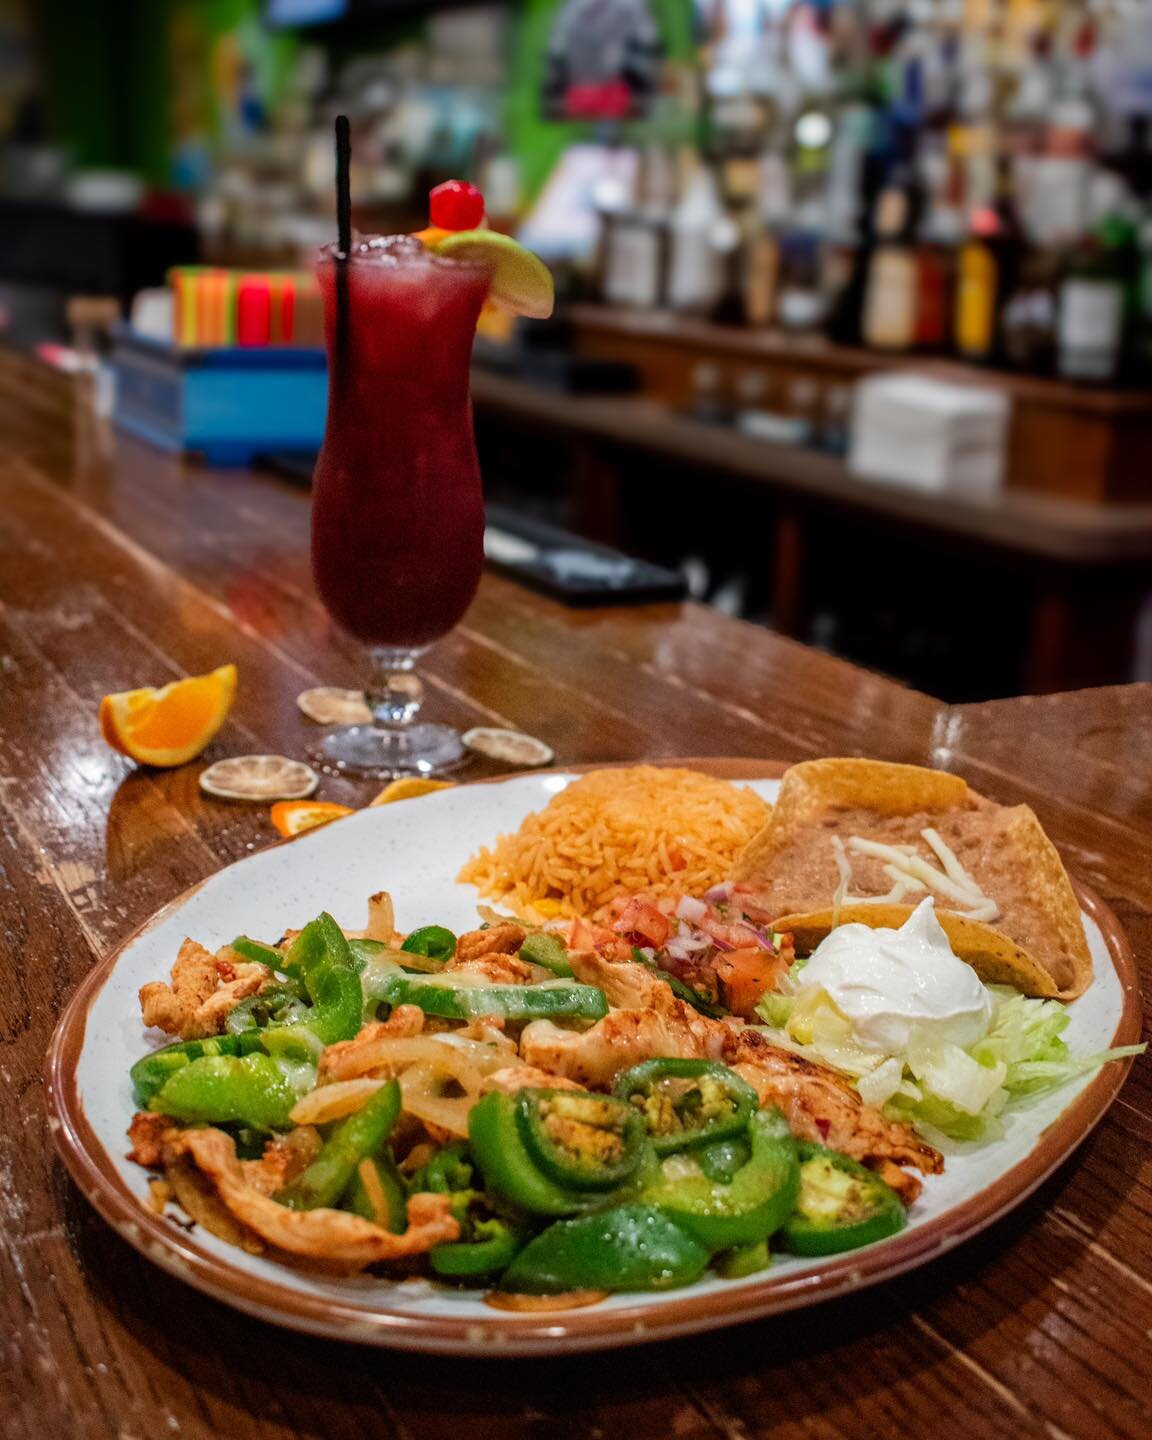 The perfect pairing &mdash; one of our most popular dishes, &lsquo;Pollo A La Mexicana&rsquo; accompanied with our homemade Sangria 😉
.
.
.
#bostonfoodies #southshorema #MexicanEats #AuthenticMexican #stoughtonma #MassachusettsEats